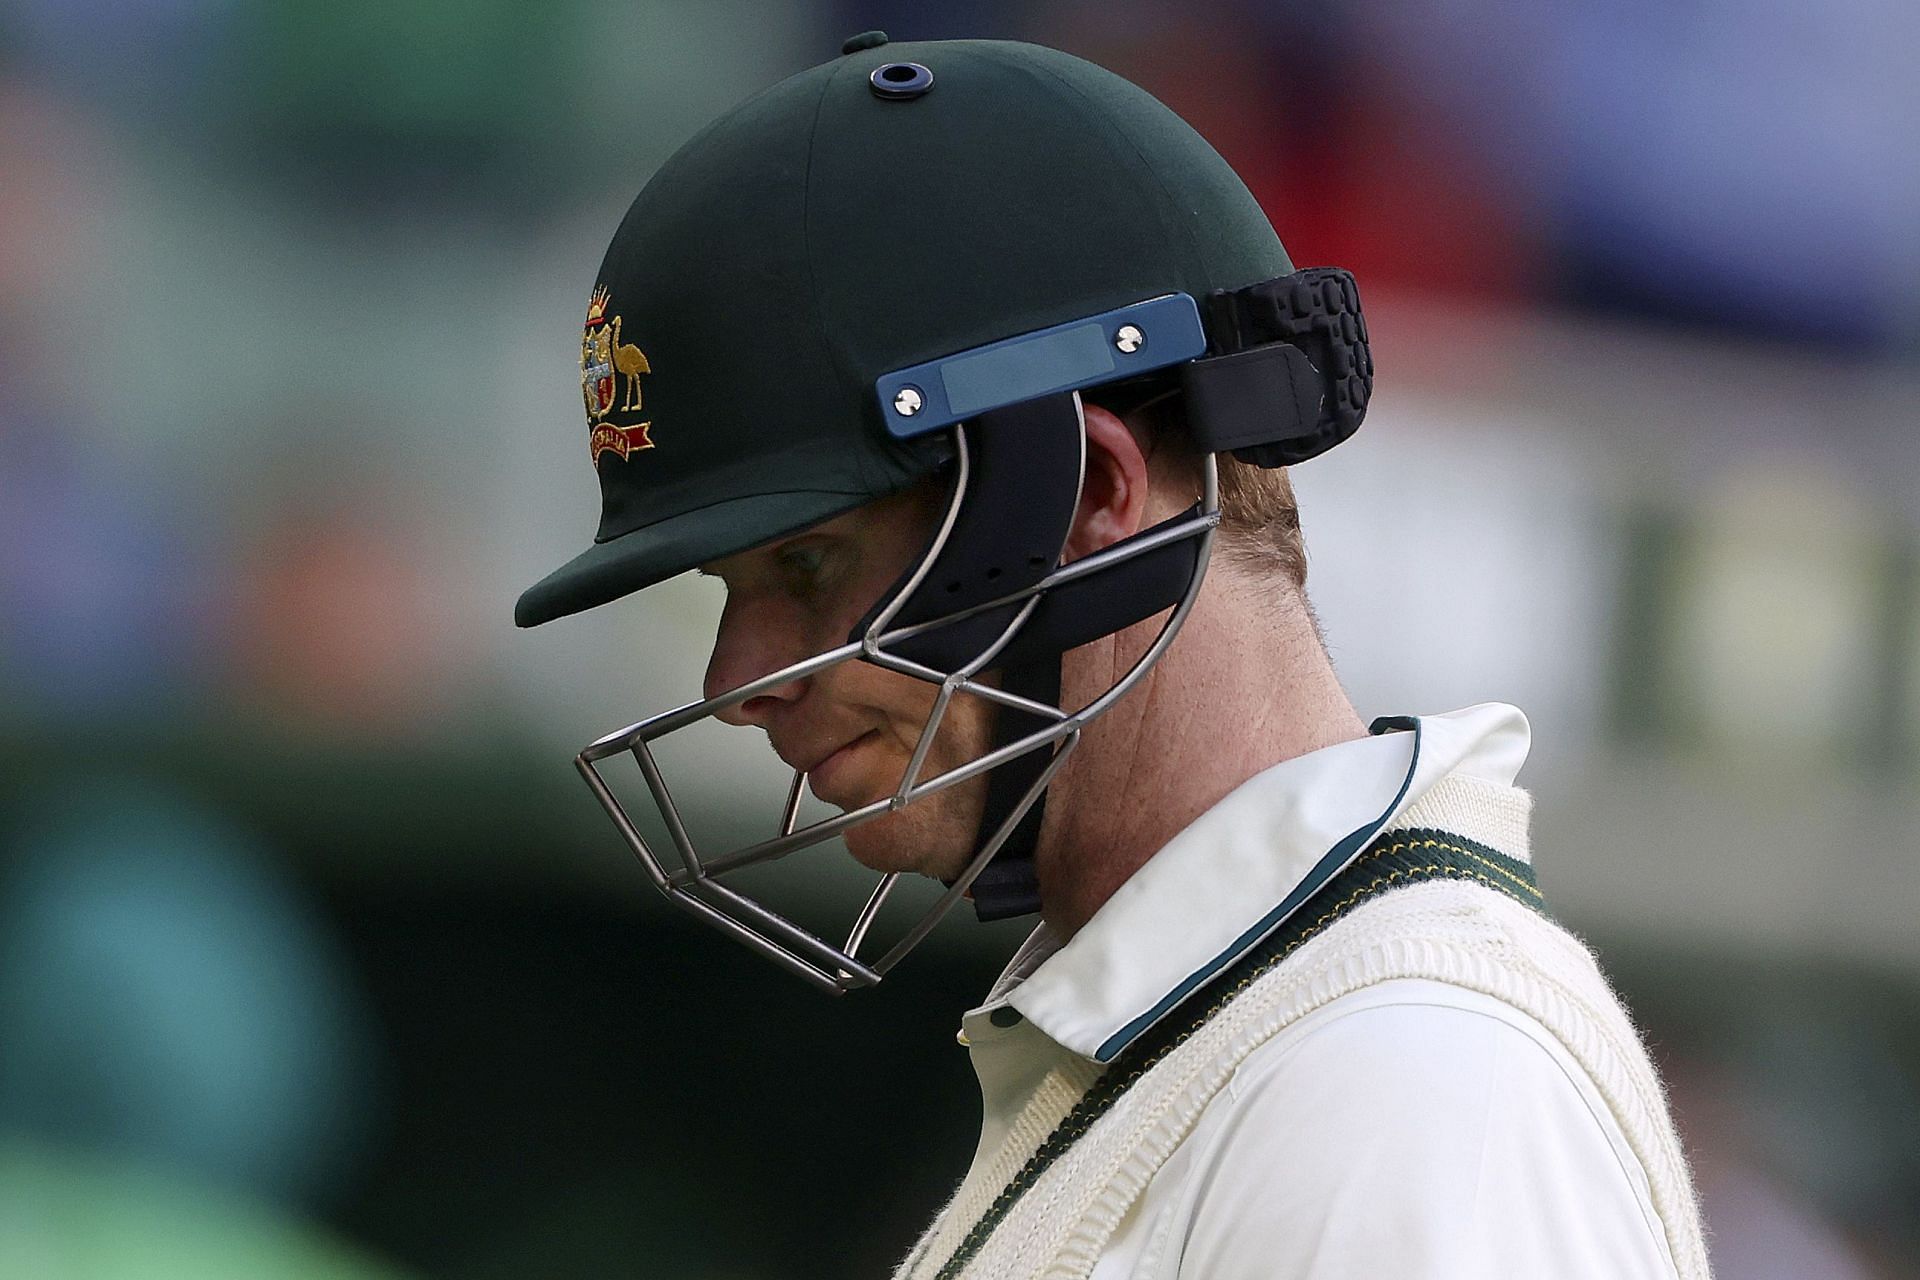 Steve Smith is one of the smartest cricketing minds right now